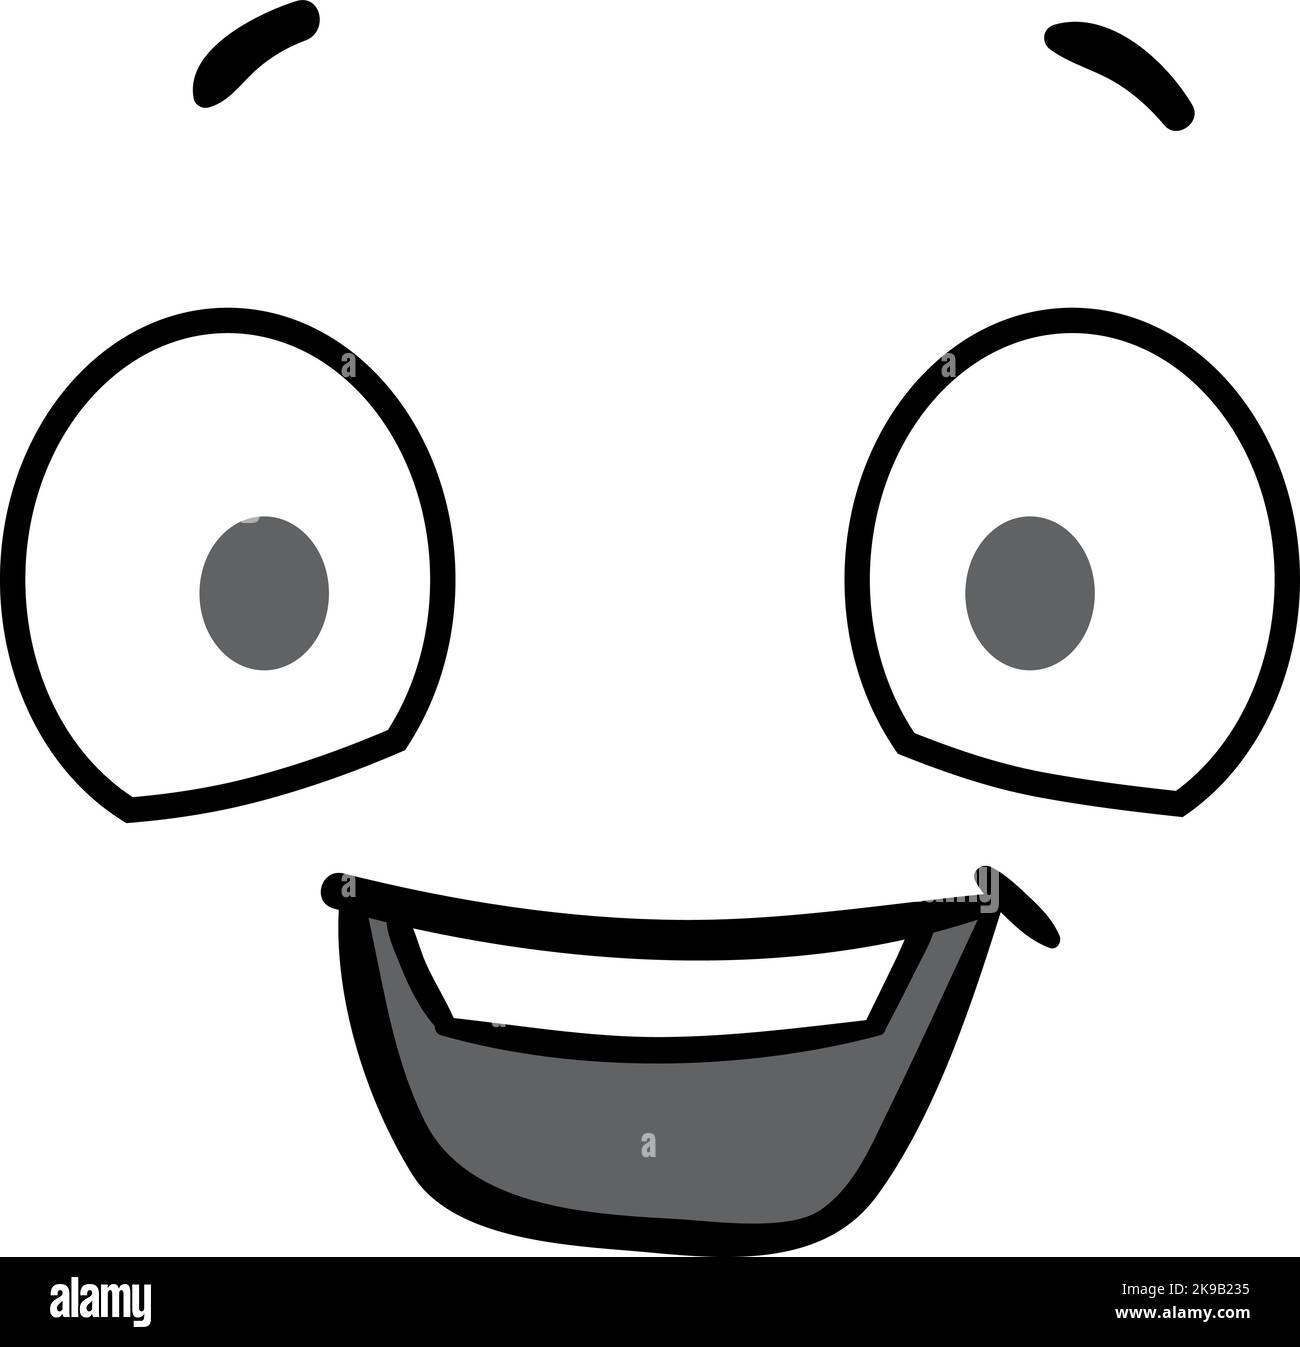 Cartoon faces Black and White Stock Photos & Images - Alamy